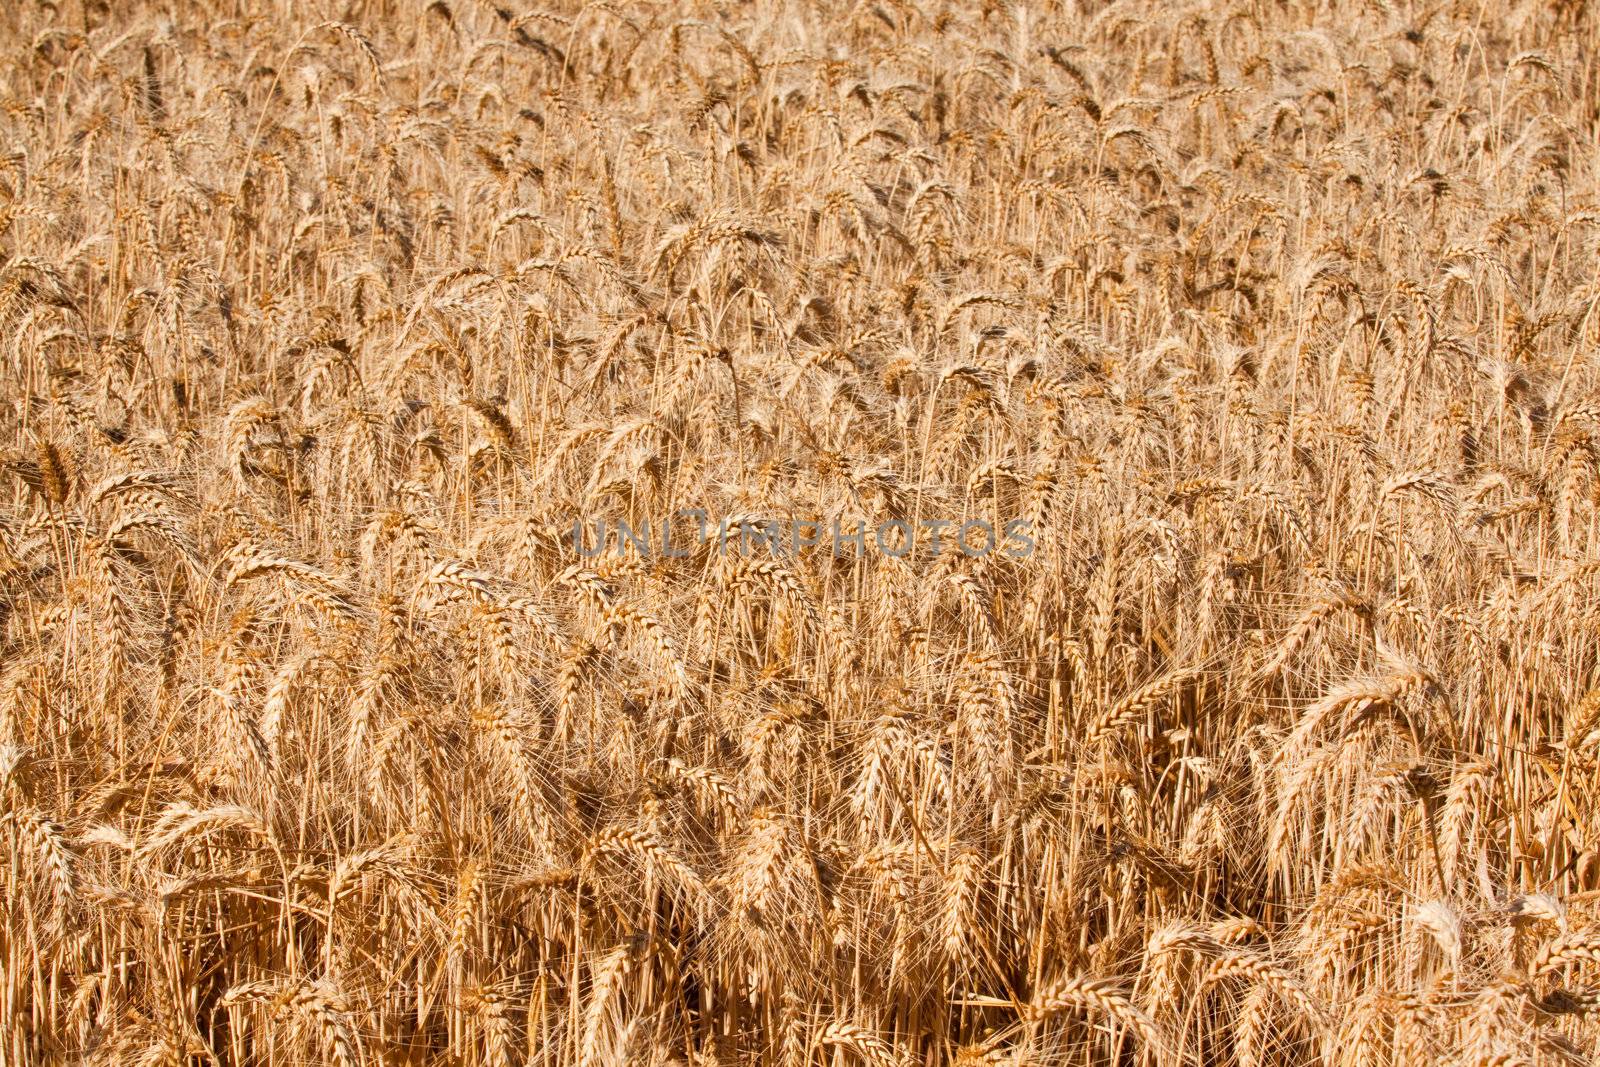 Abstract detail of wheat in a field.